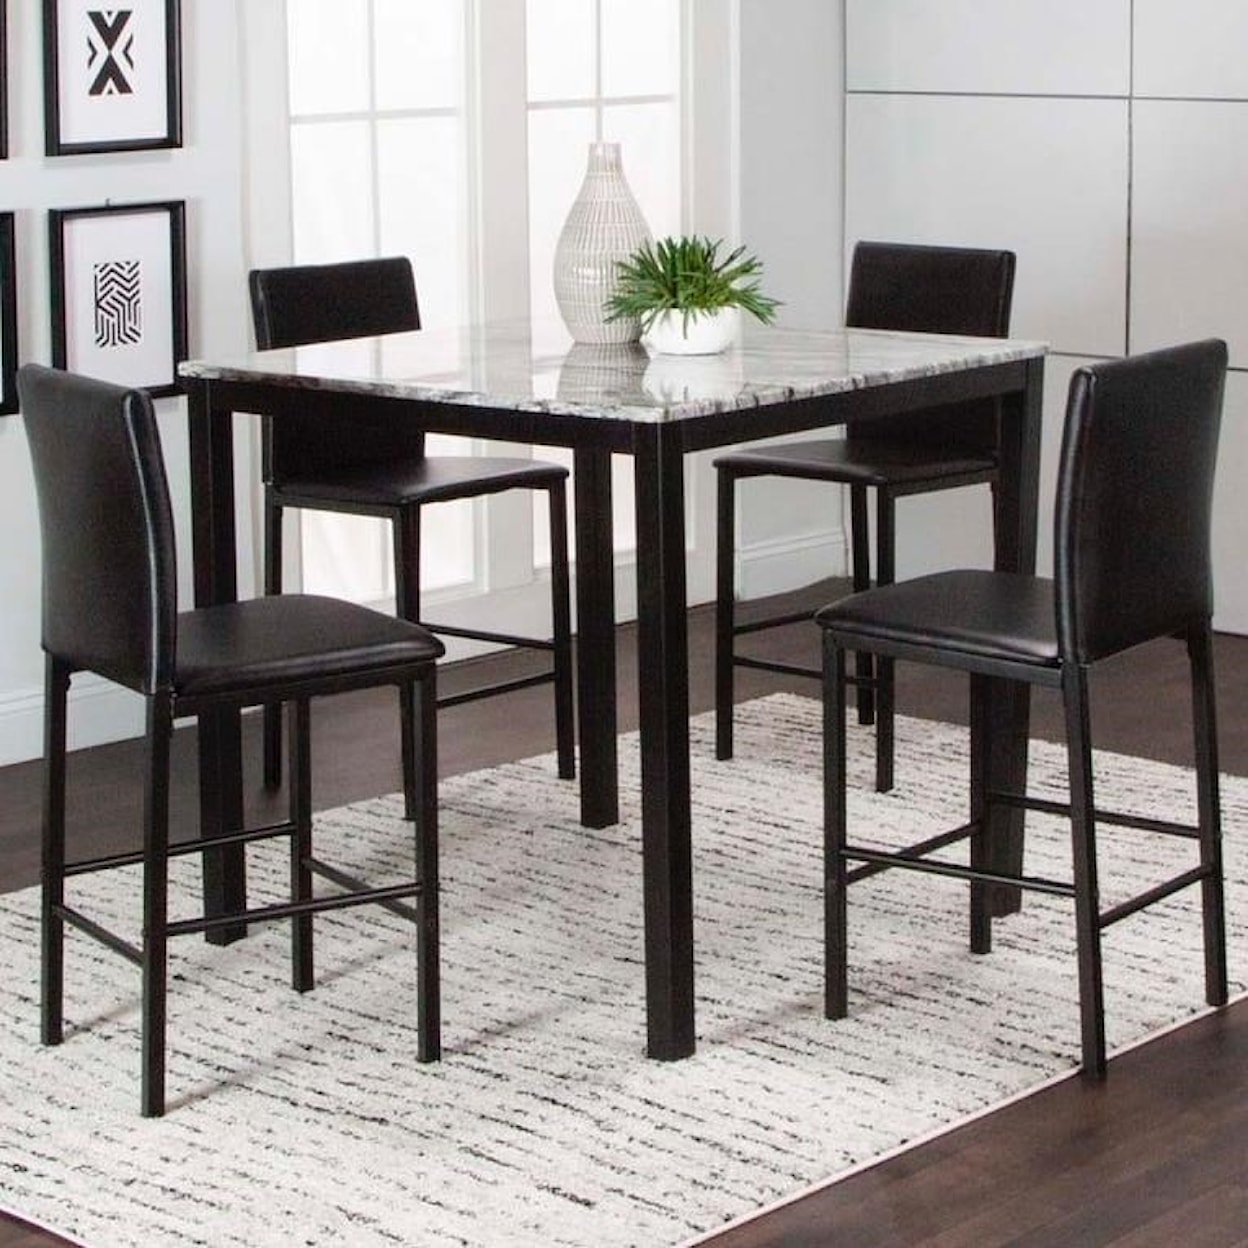 Cramco, Inc Julie 5pc Dining Room Group